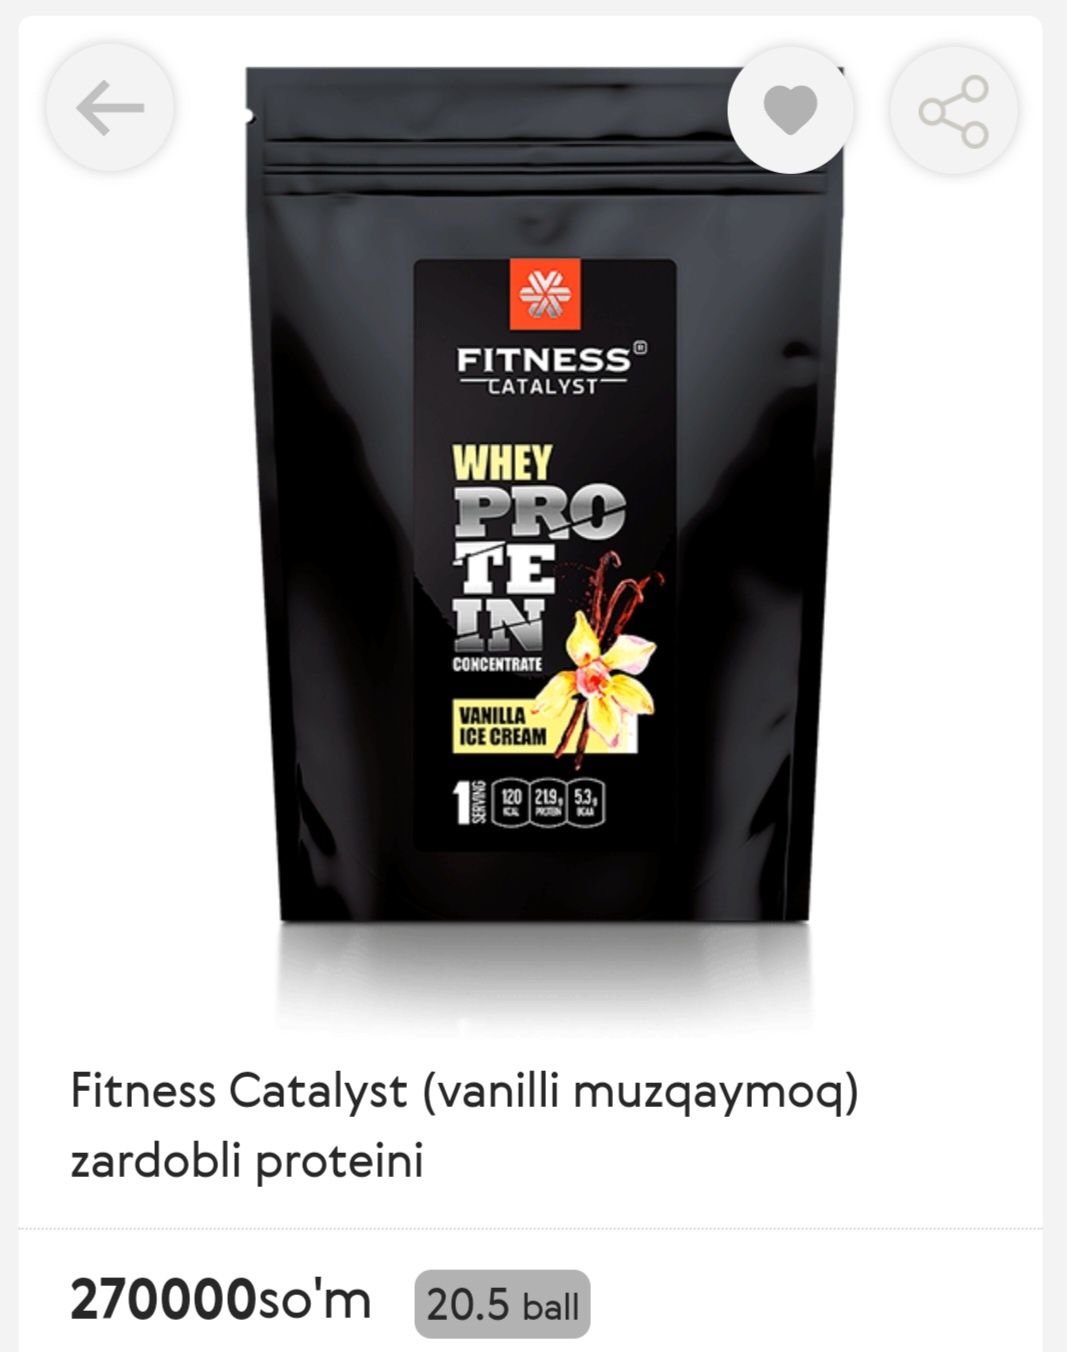 Protein  Fitness catalyts Halol